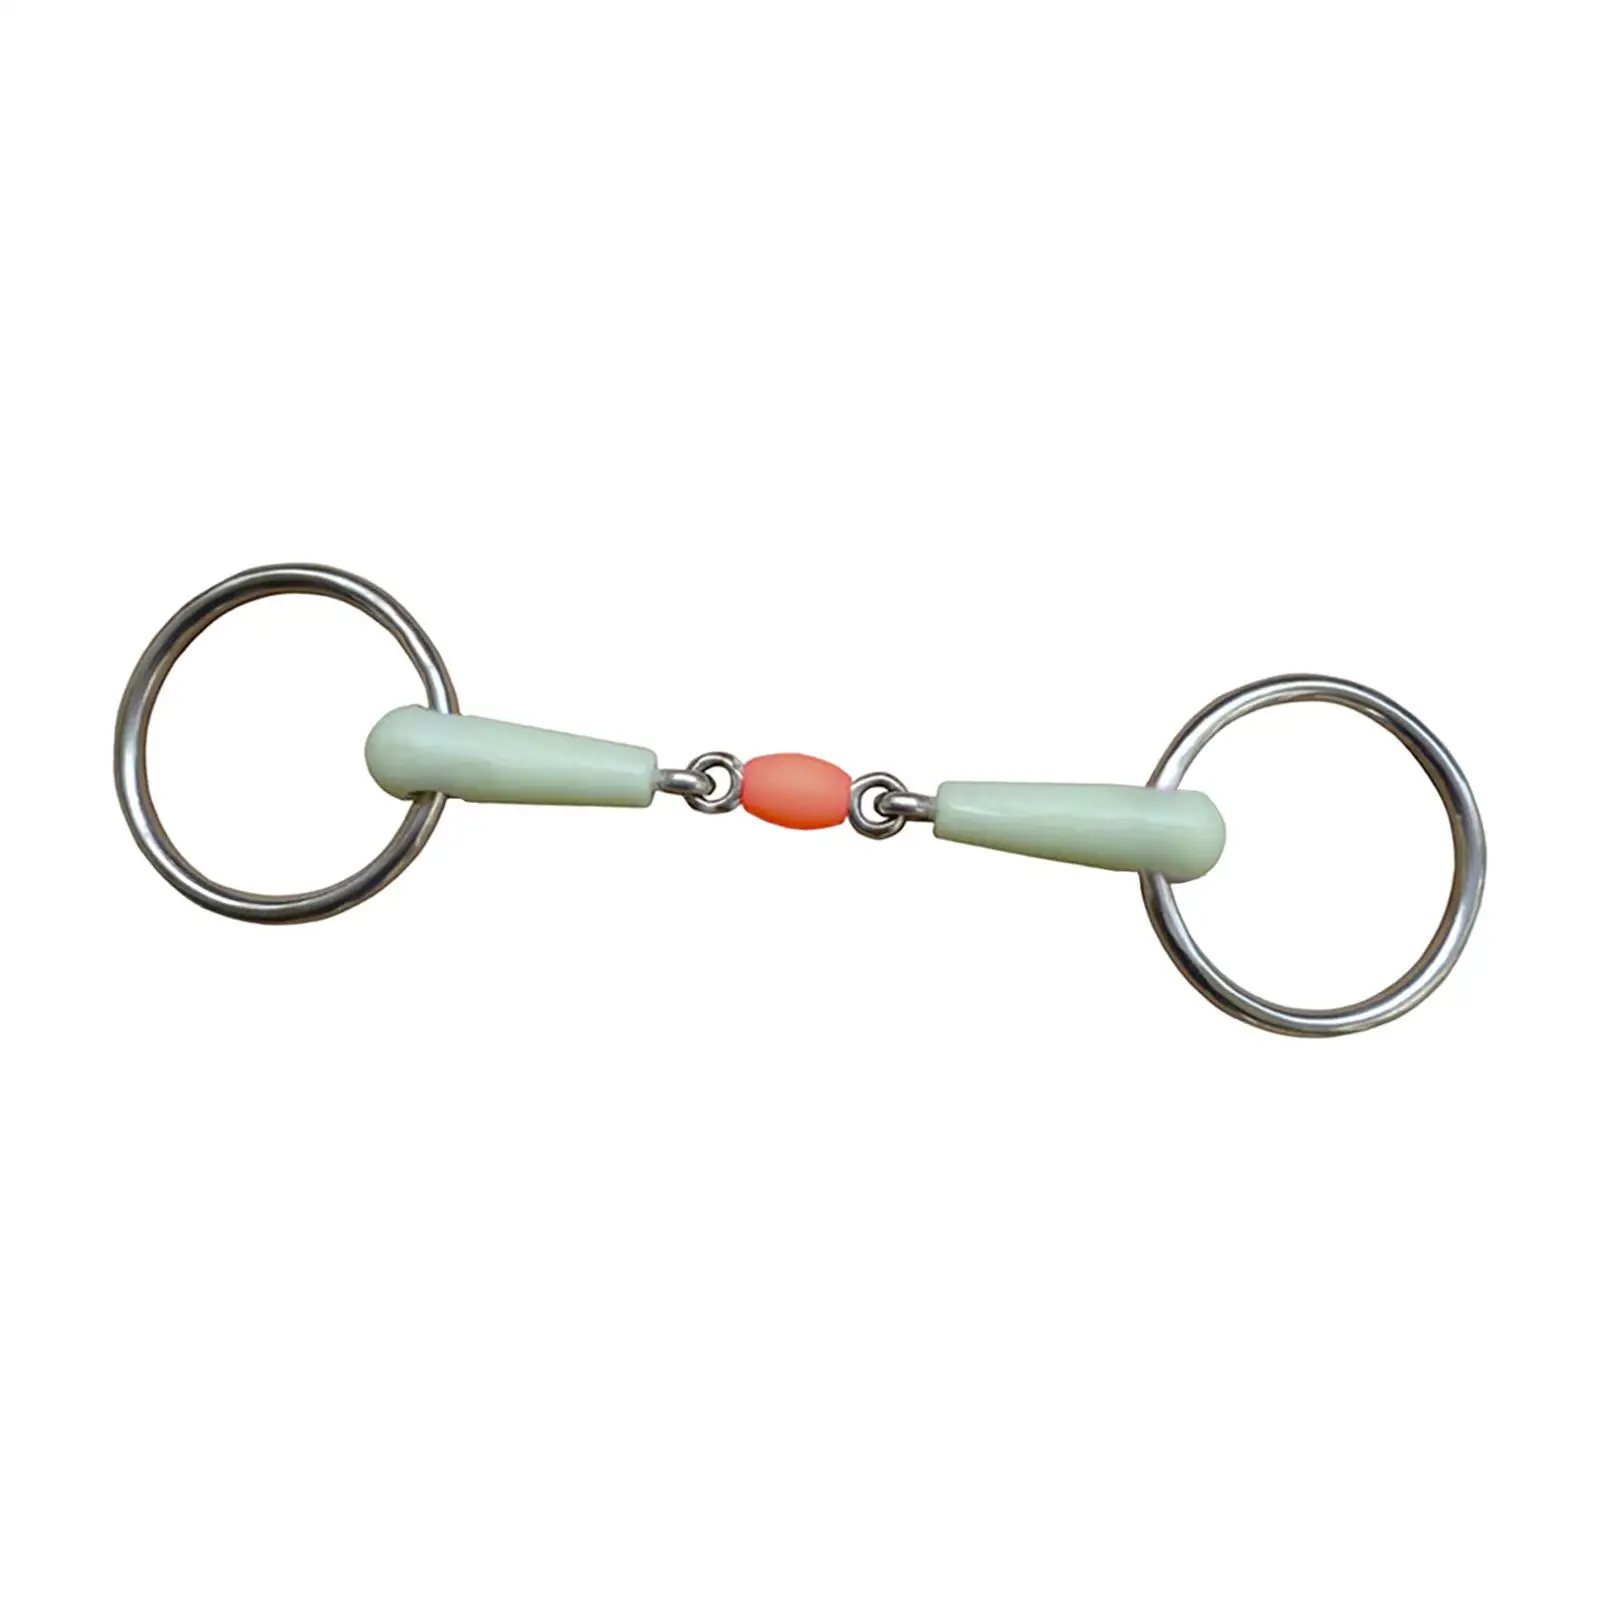 

horse Mouth Bit Snaffle Bits Jointed Mouth Horse Bit Supplies Round Stainless for Equipment Training Cheek